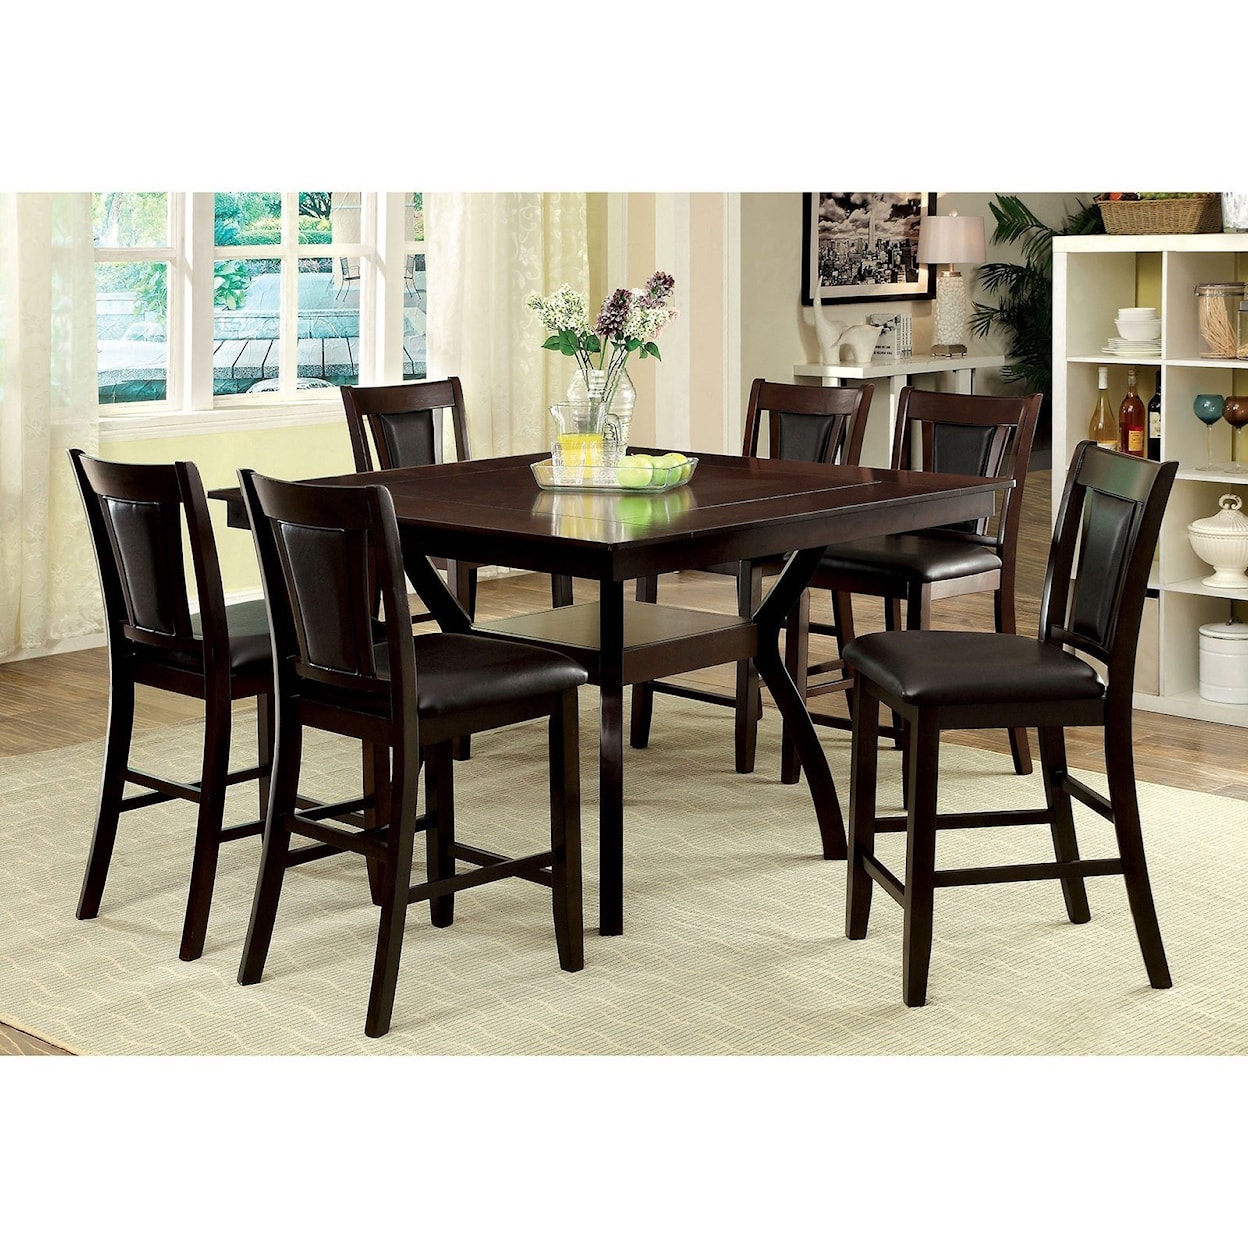 Furniture of America Brent 7 Pc Counter Height Dining Set